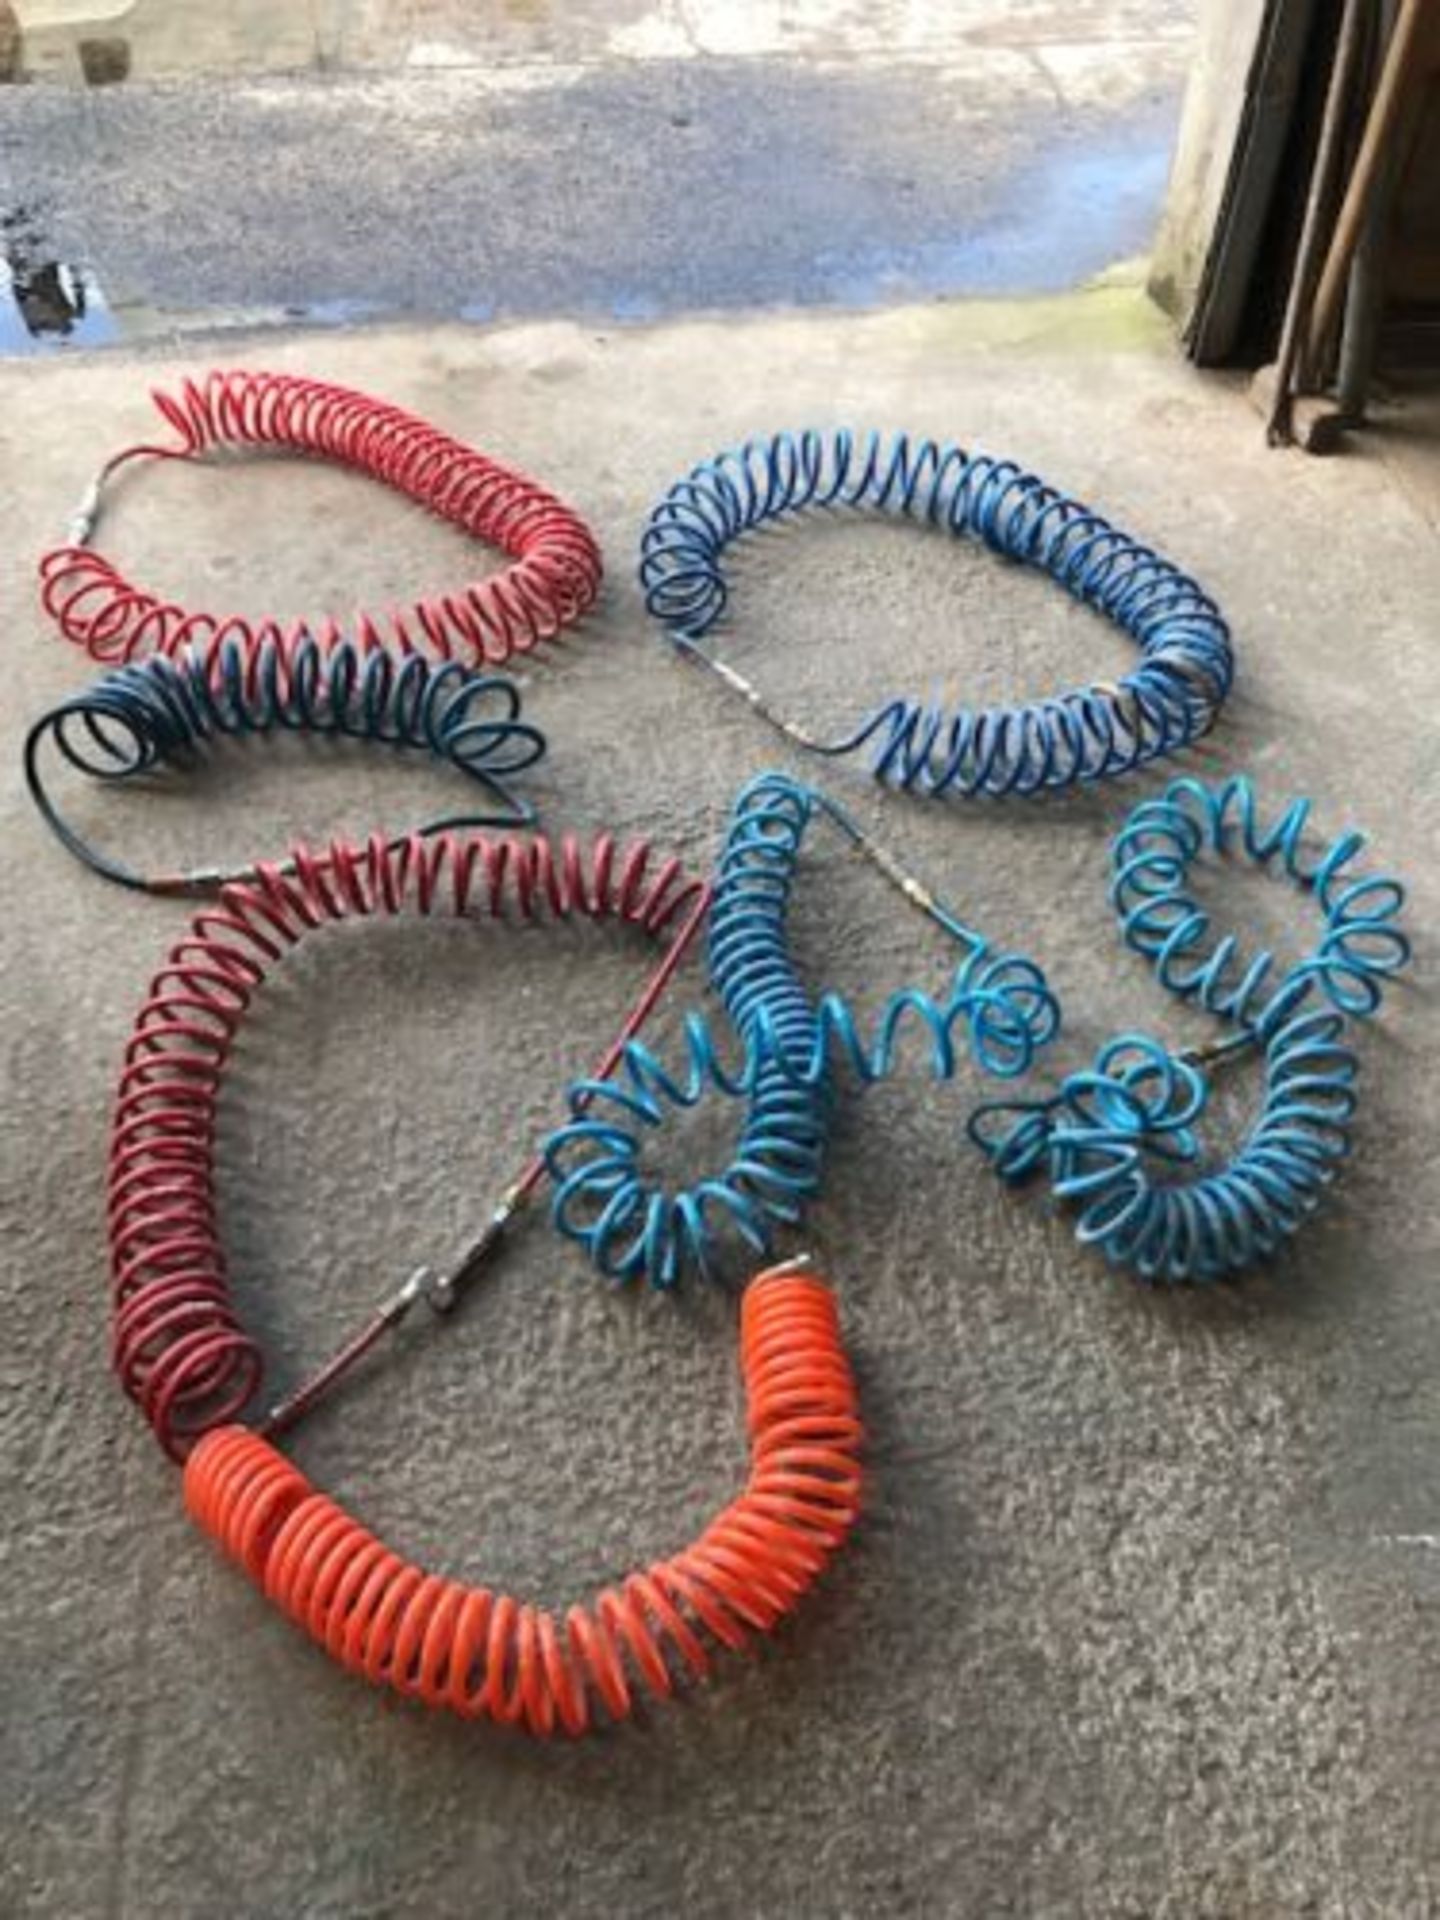 7 coil air hoses with ends